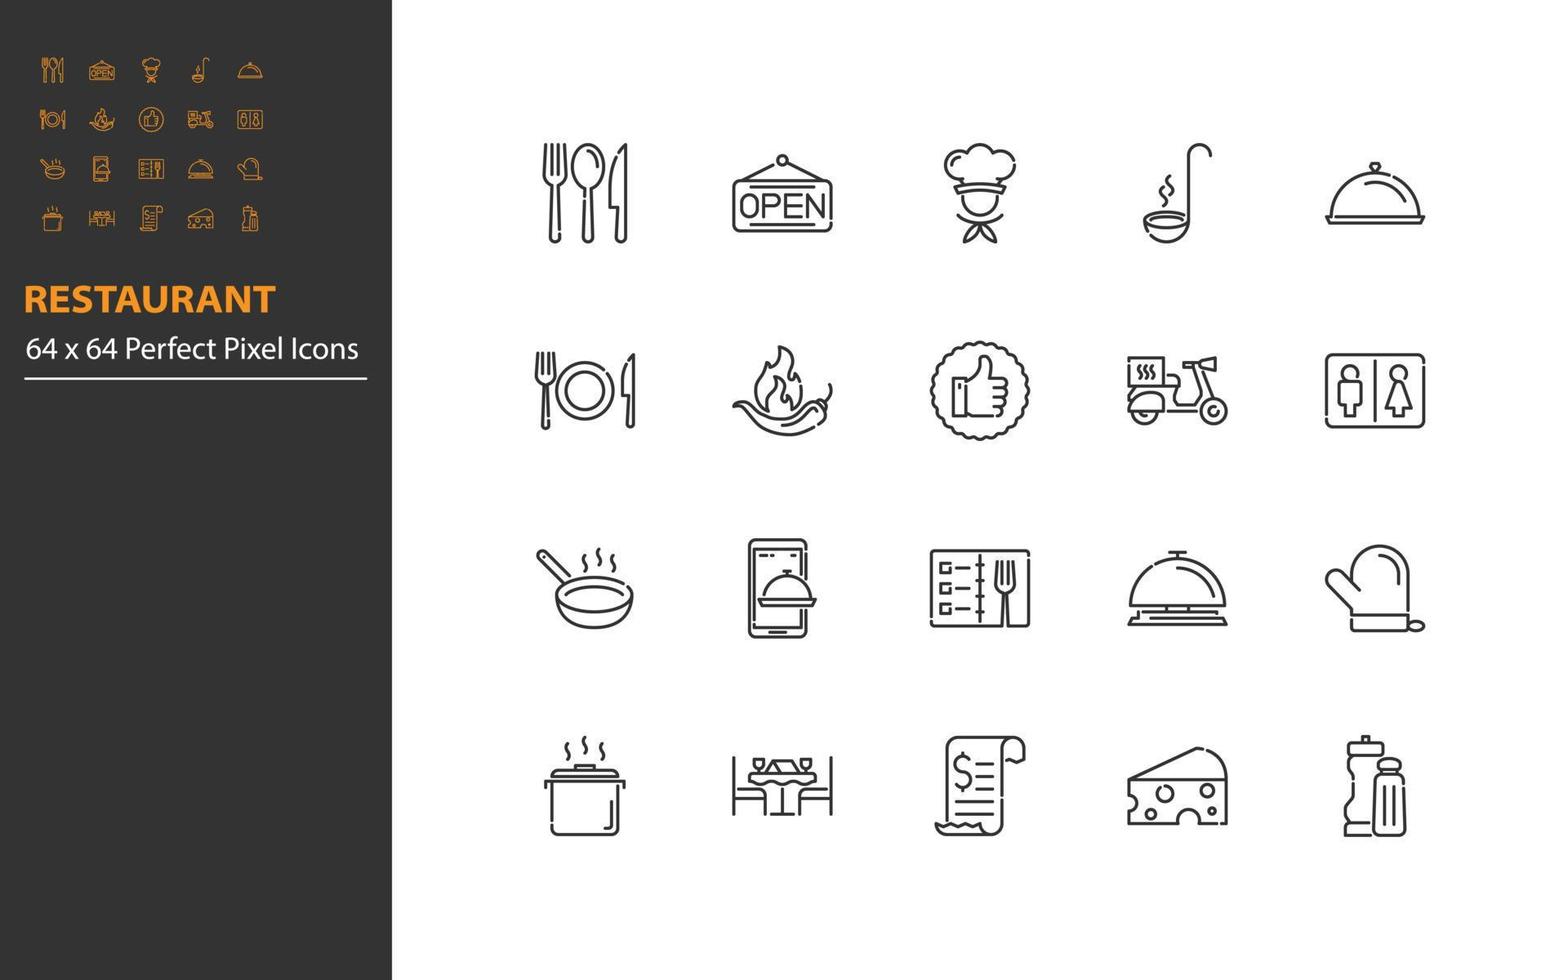 set of restaurant thin line icons 256x256 px vector